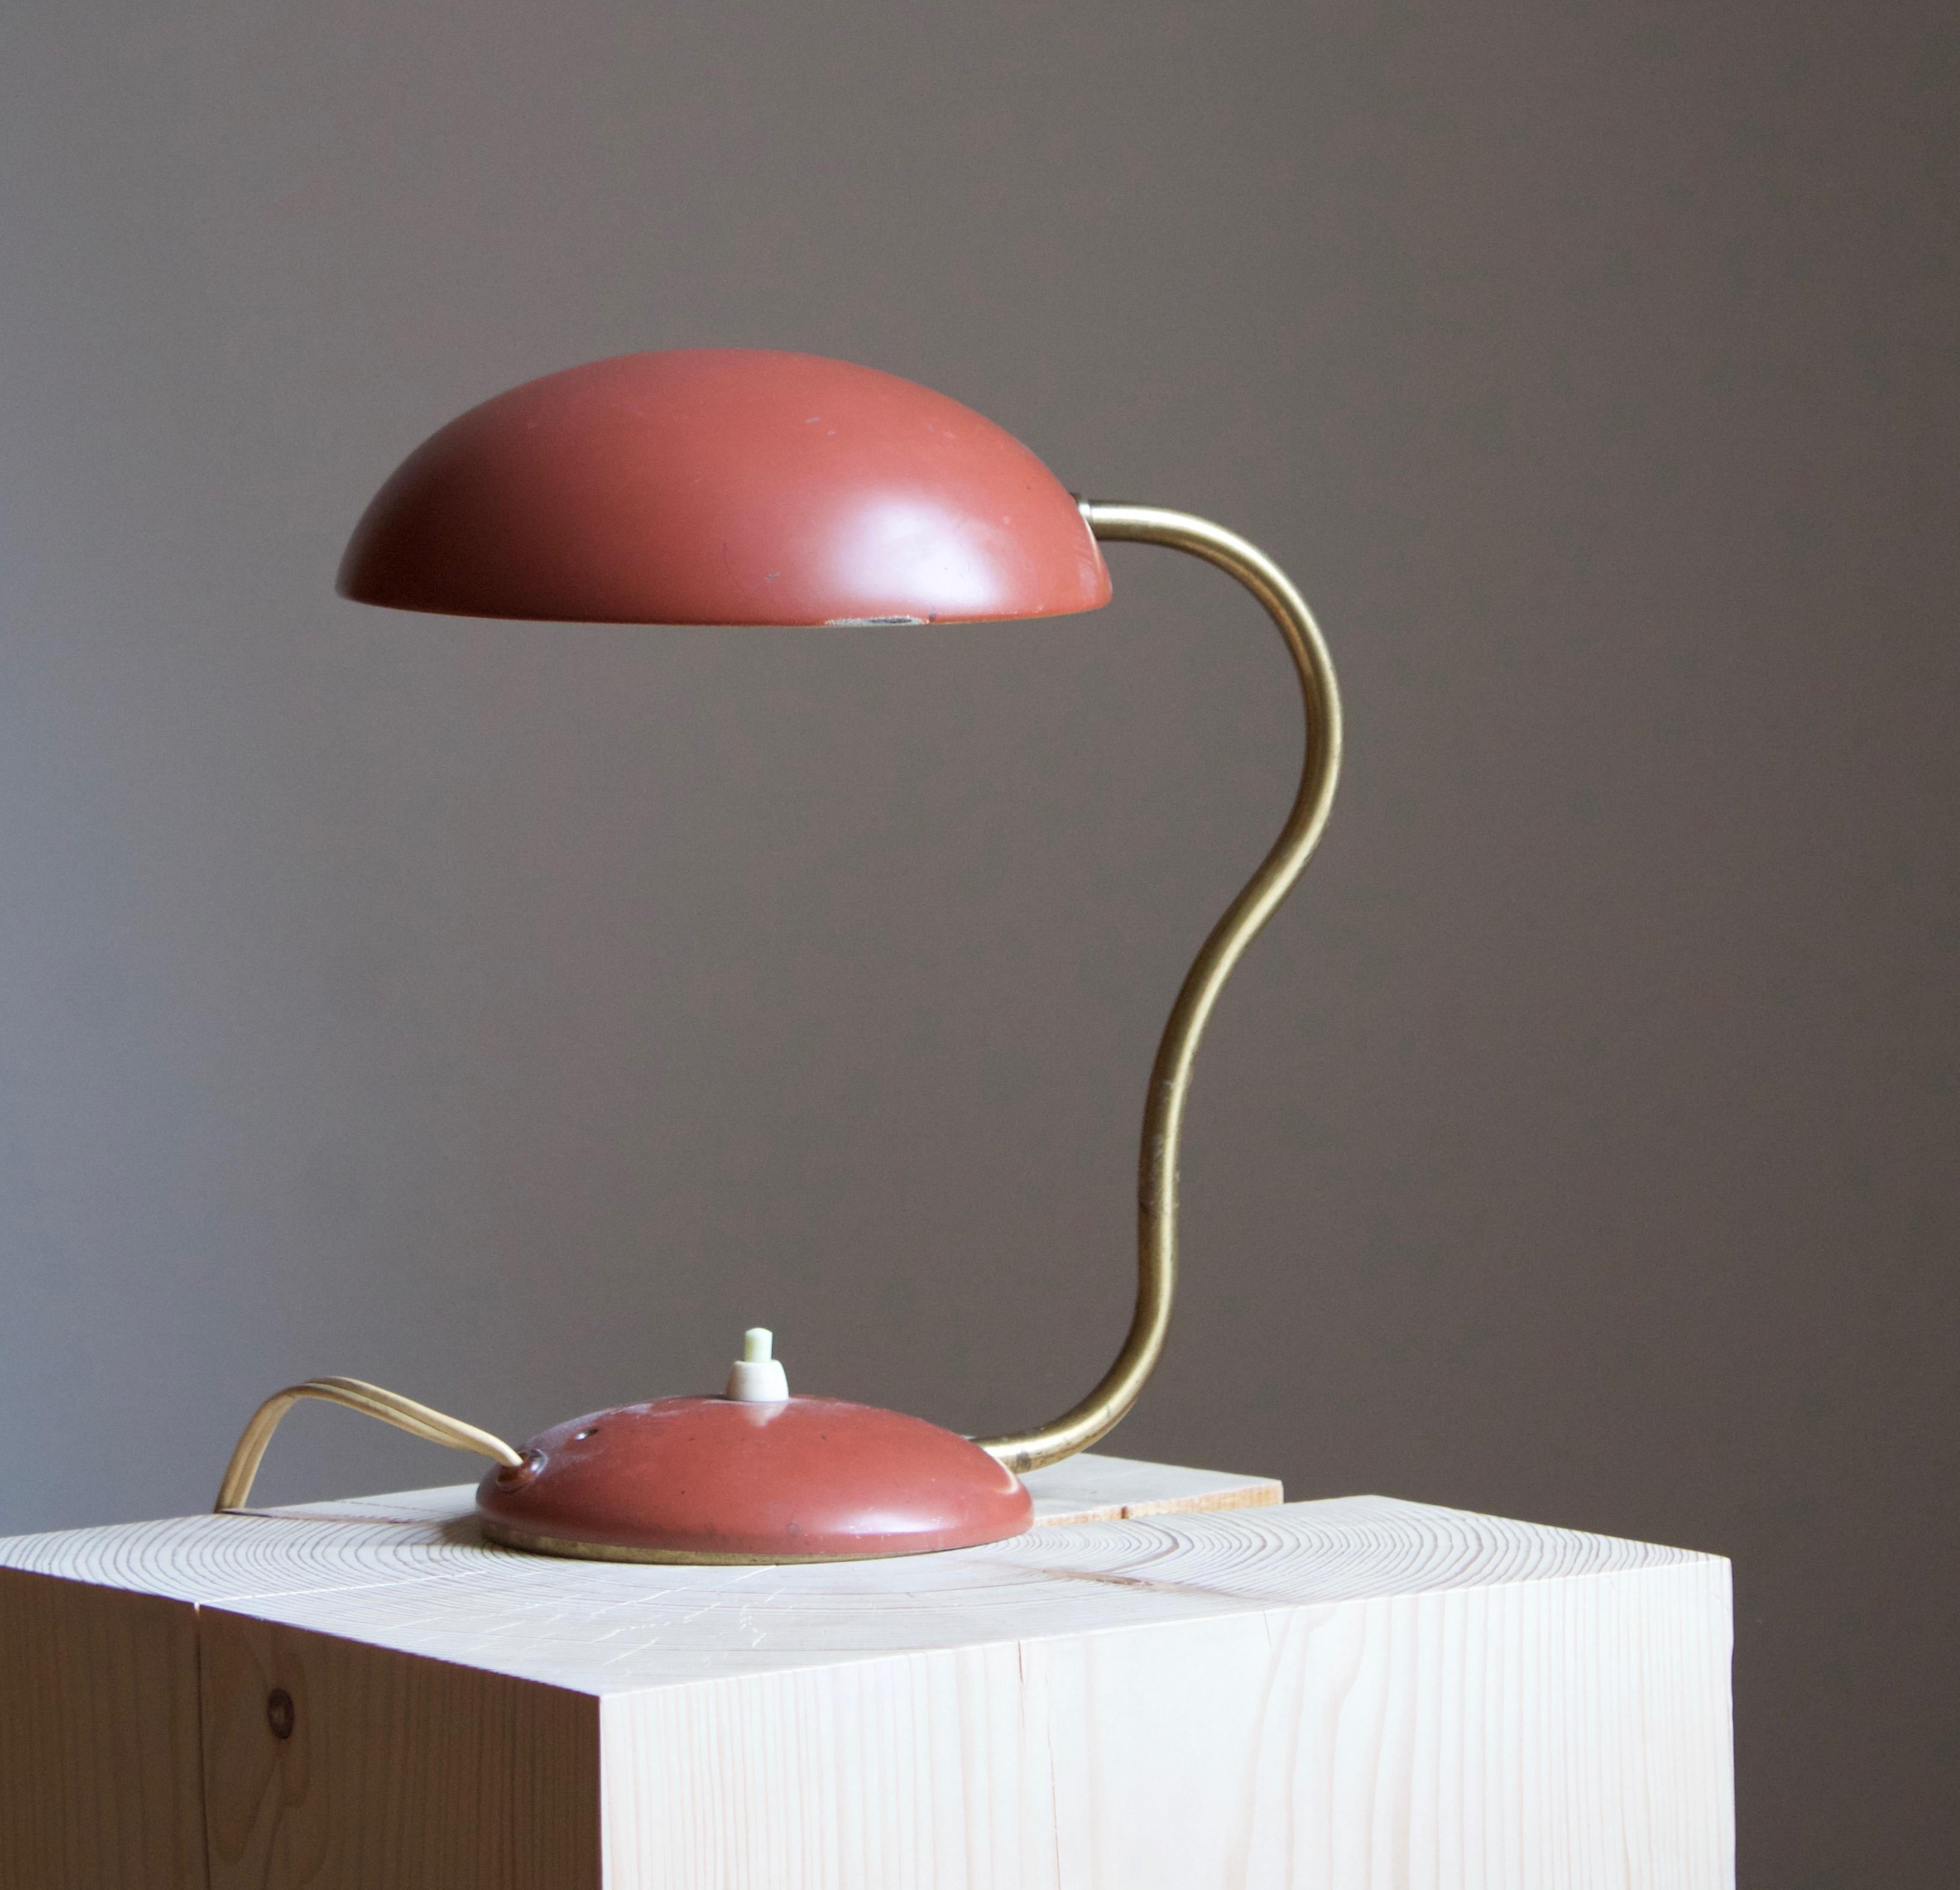 A small organic and adjustable table lamp / desk light. Produced by Asea, 1950s. Features brass and red lacquered metal. 

Electrical plug for Swedish outlets. 

Other designers of the period working in similar style include Hans Bergström,